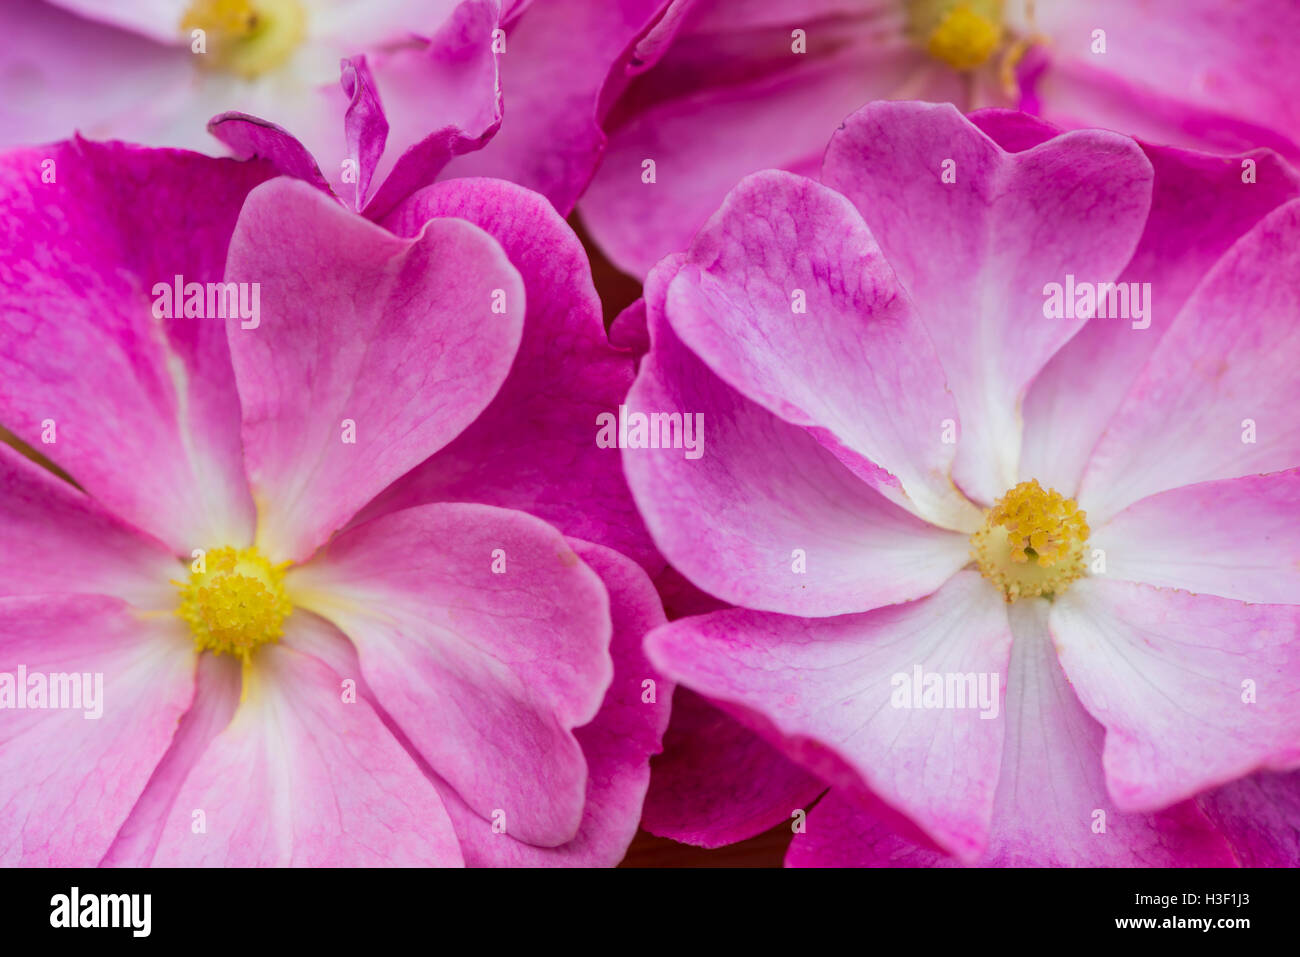 Detail of two pink rose flowers. Stock Photo